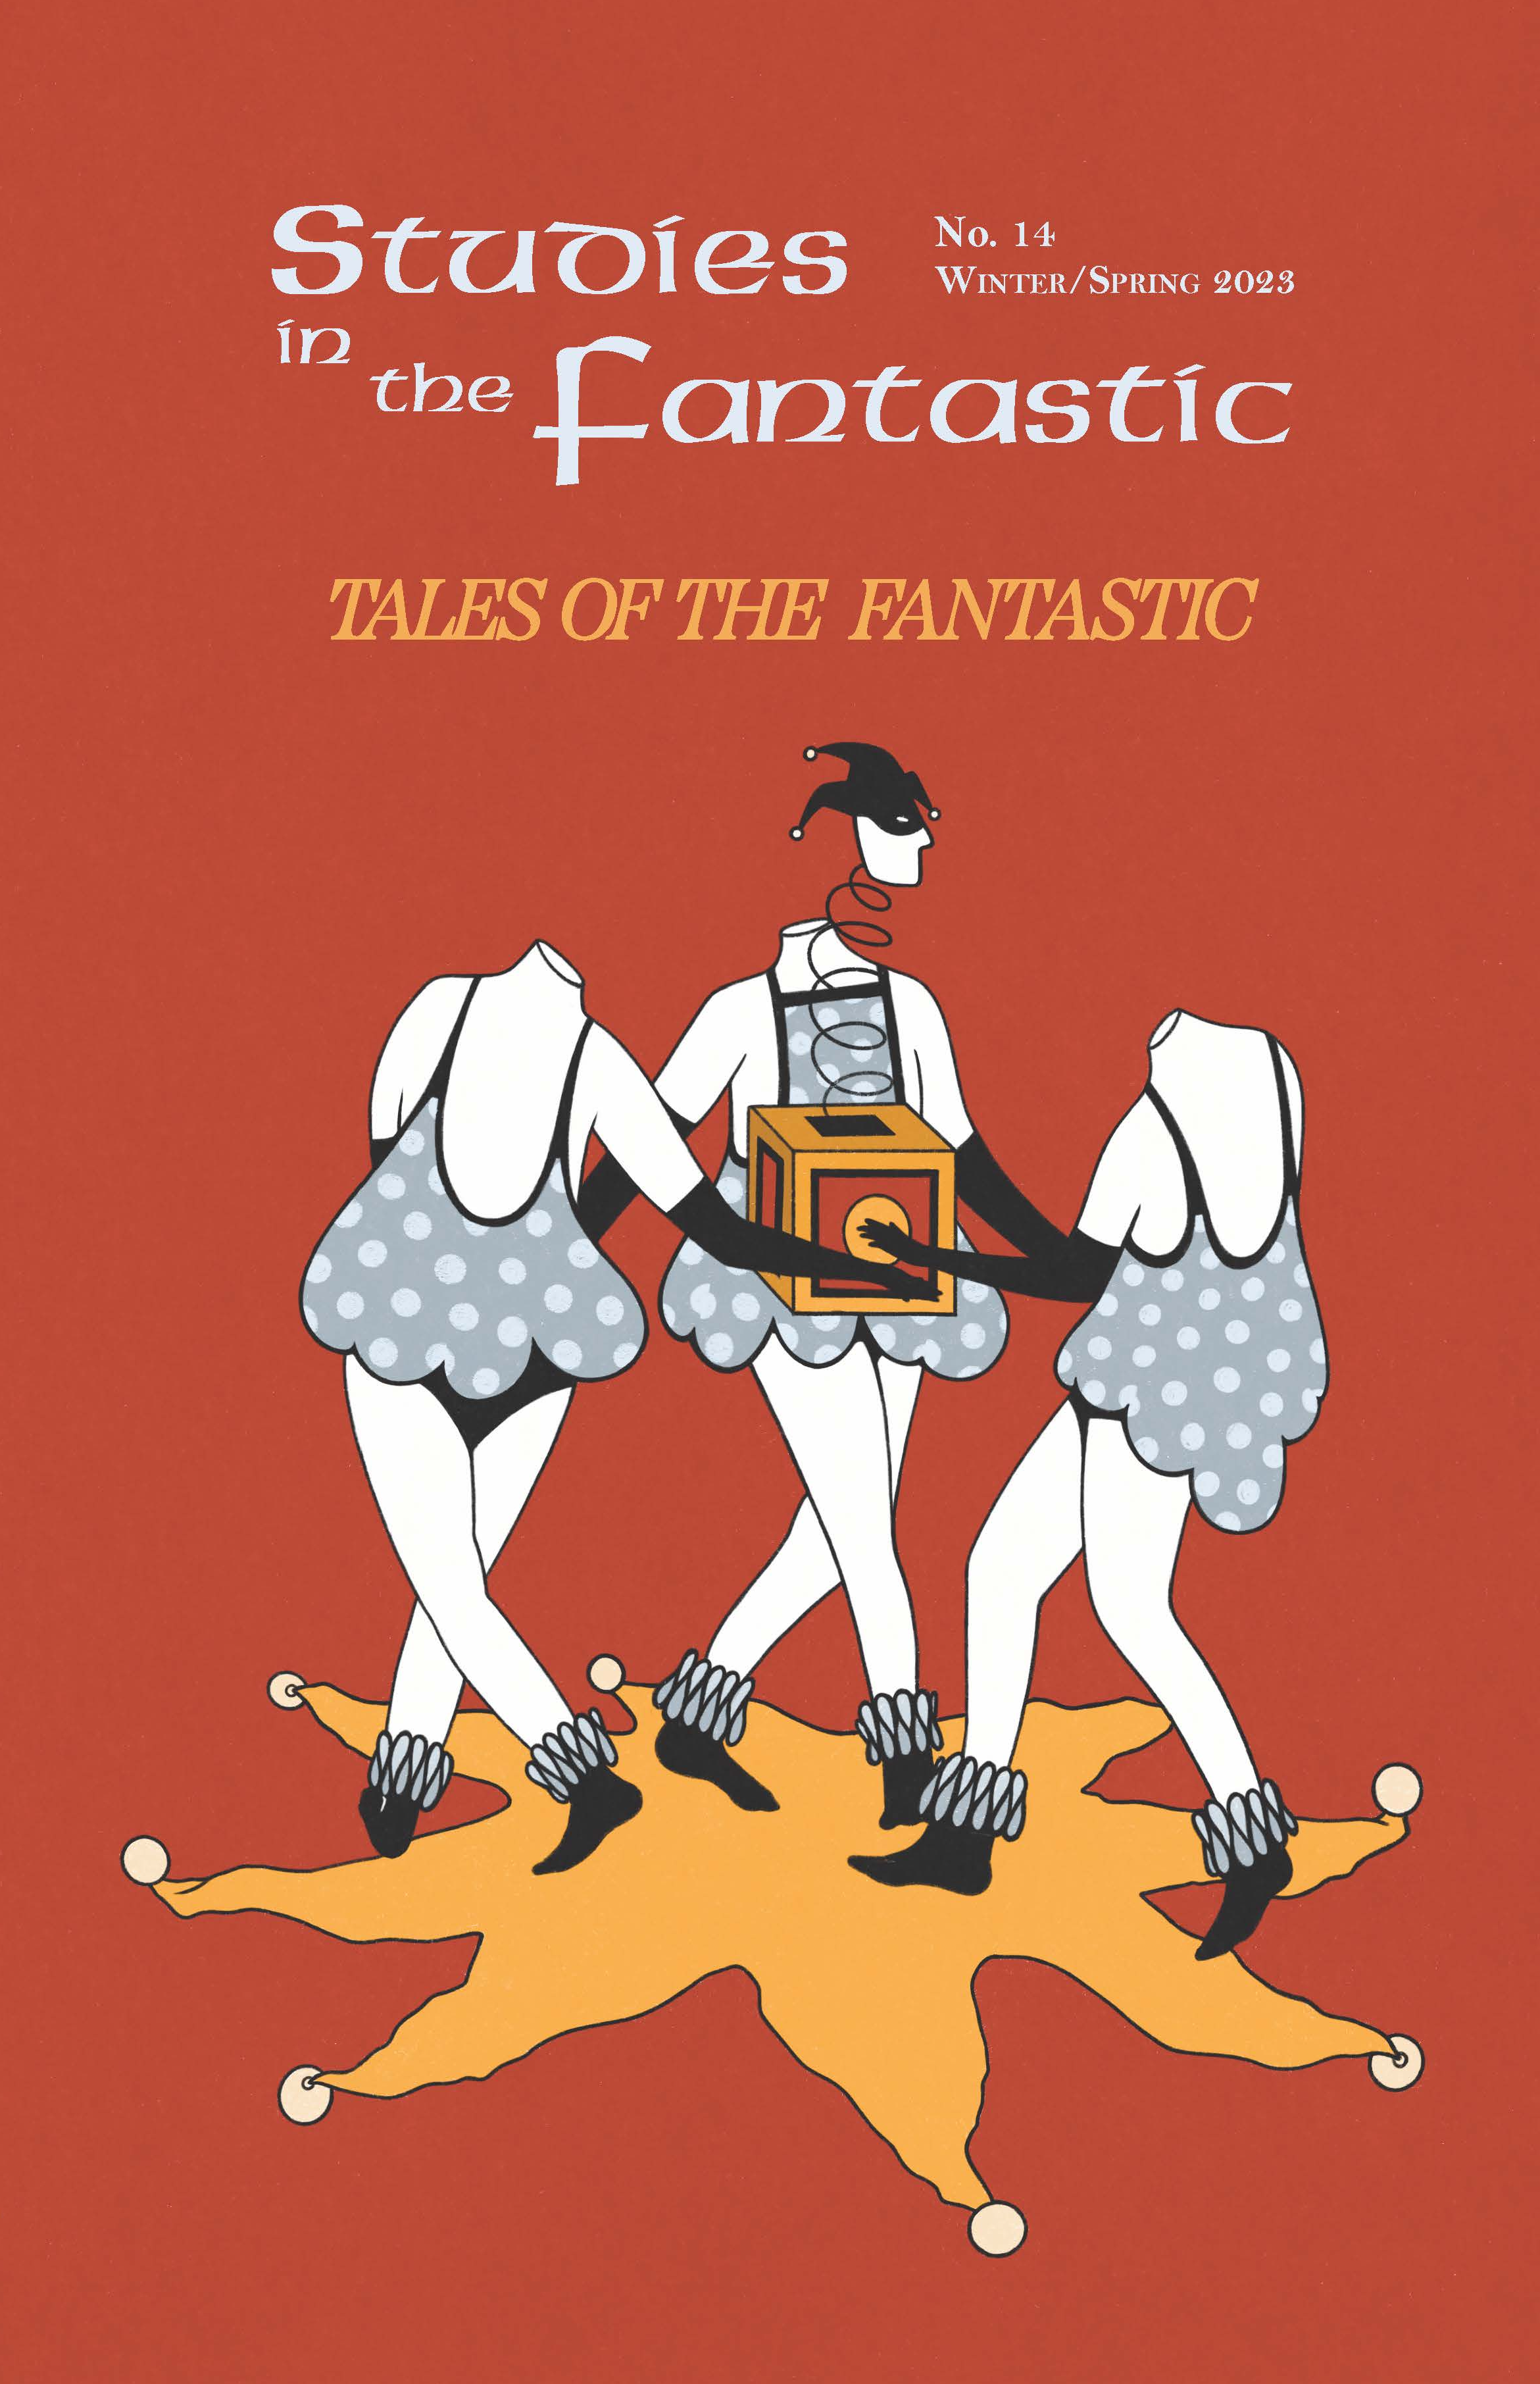 Image of the front cover of Studies in the Fantastic No. 14: Tales of the Fantastic.